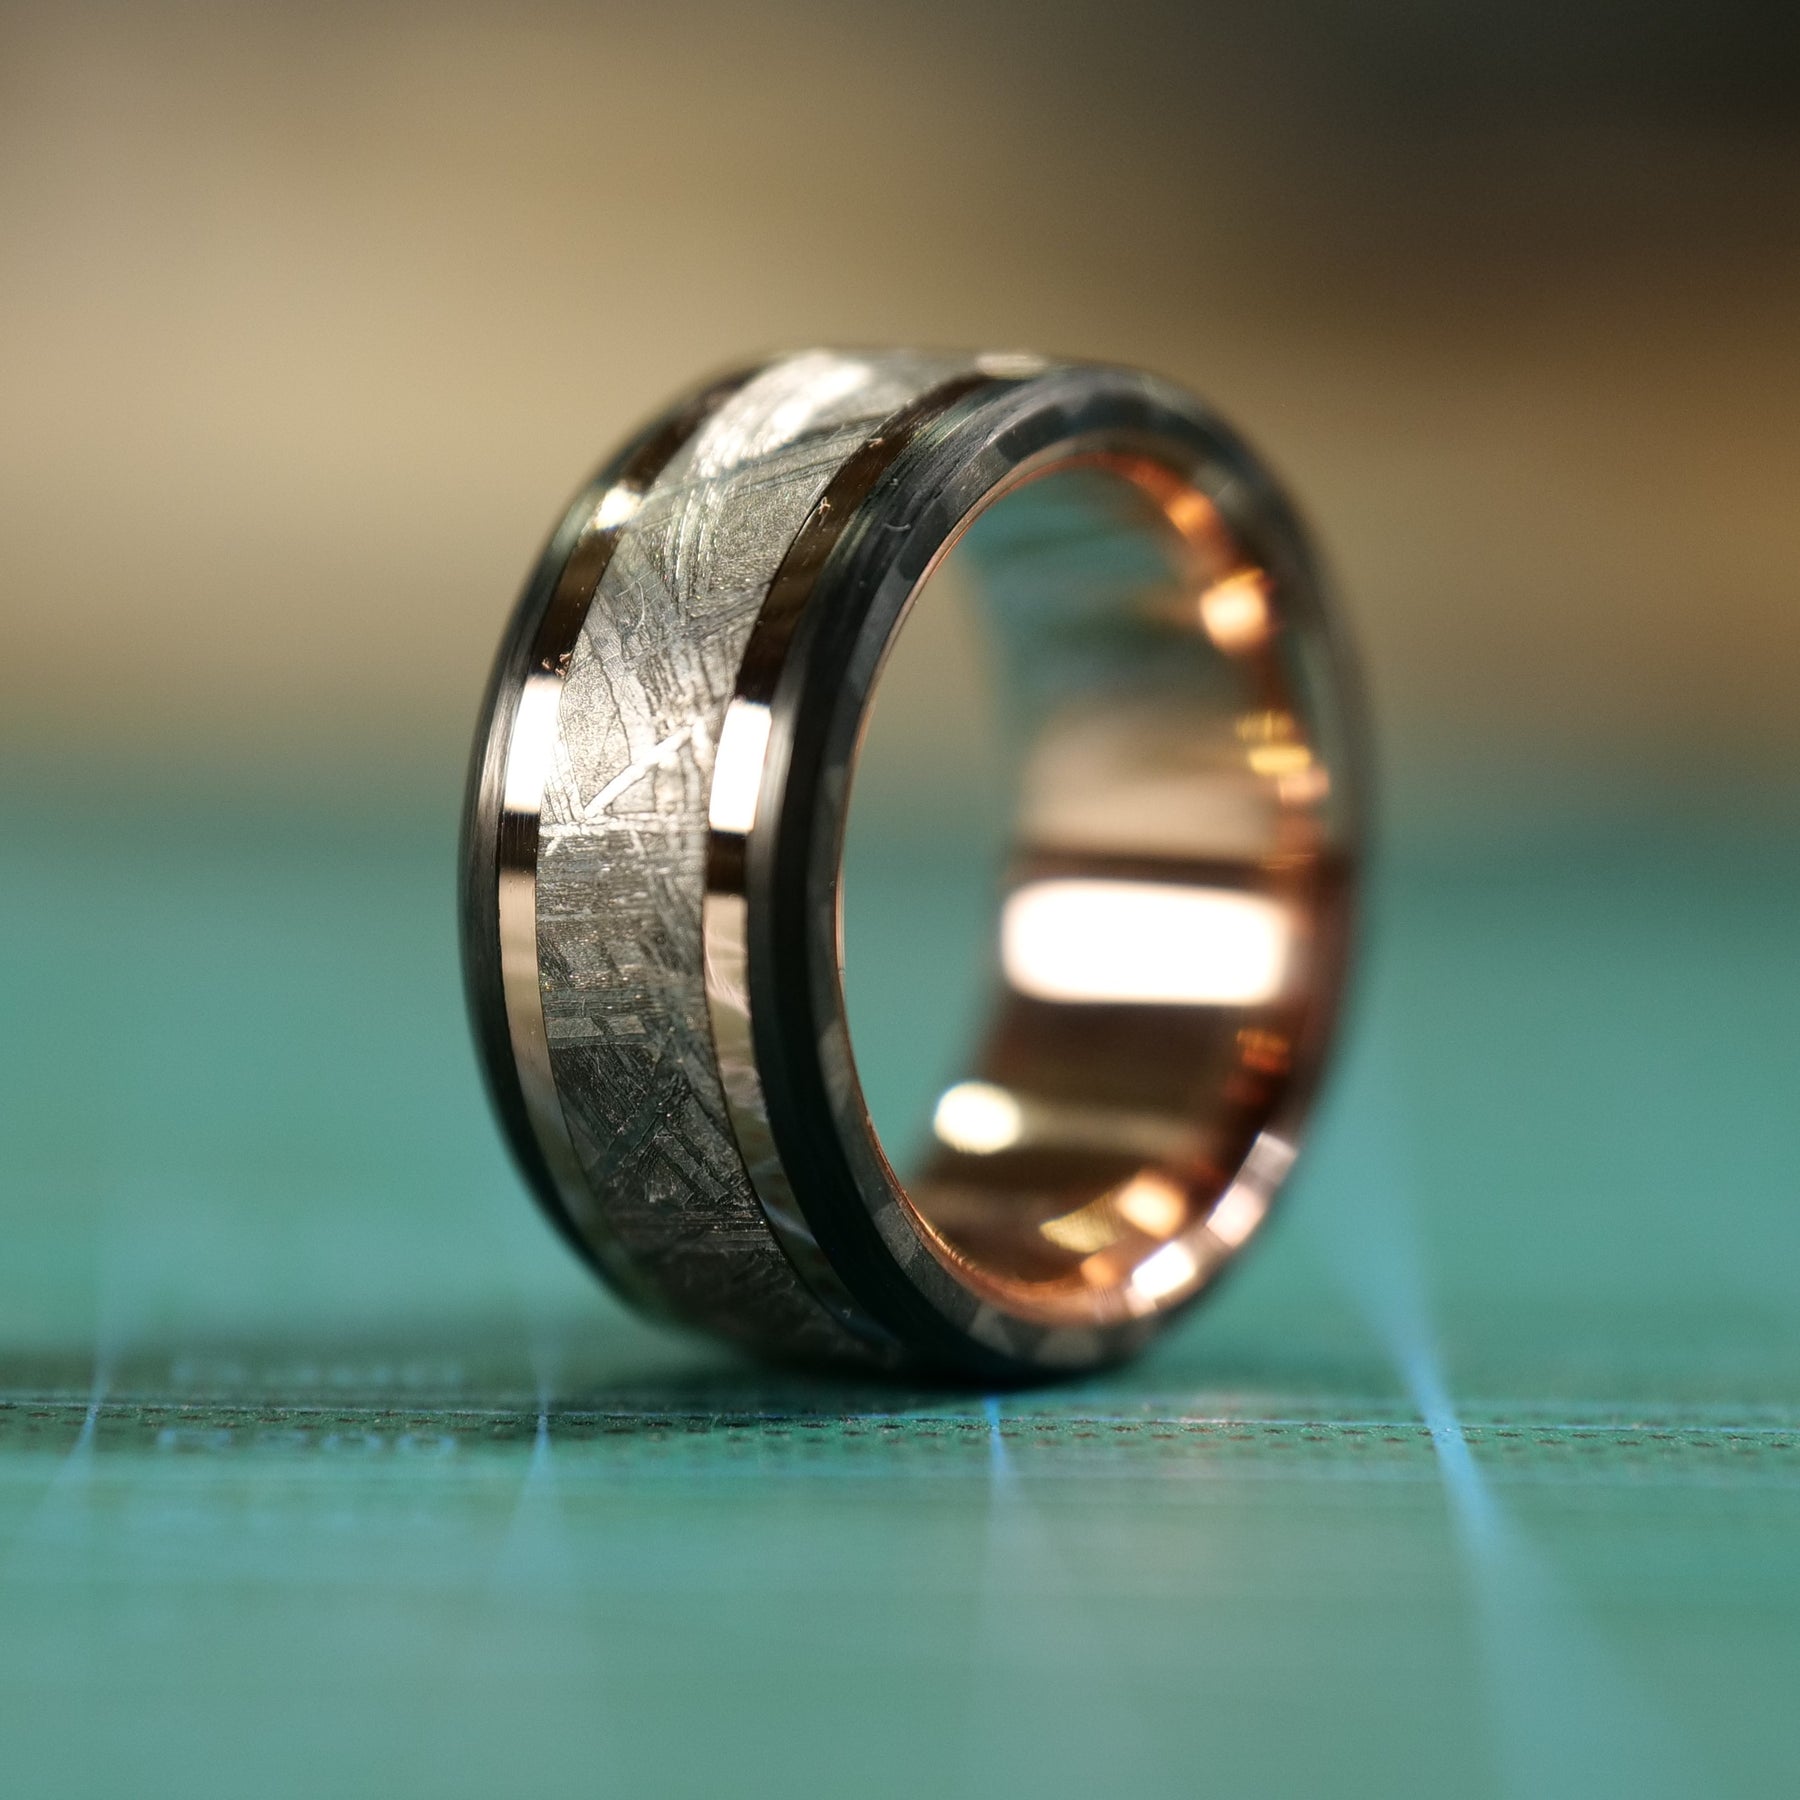 How to Clean and Care for Meteorite Rings | Chris Ploof Designs